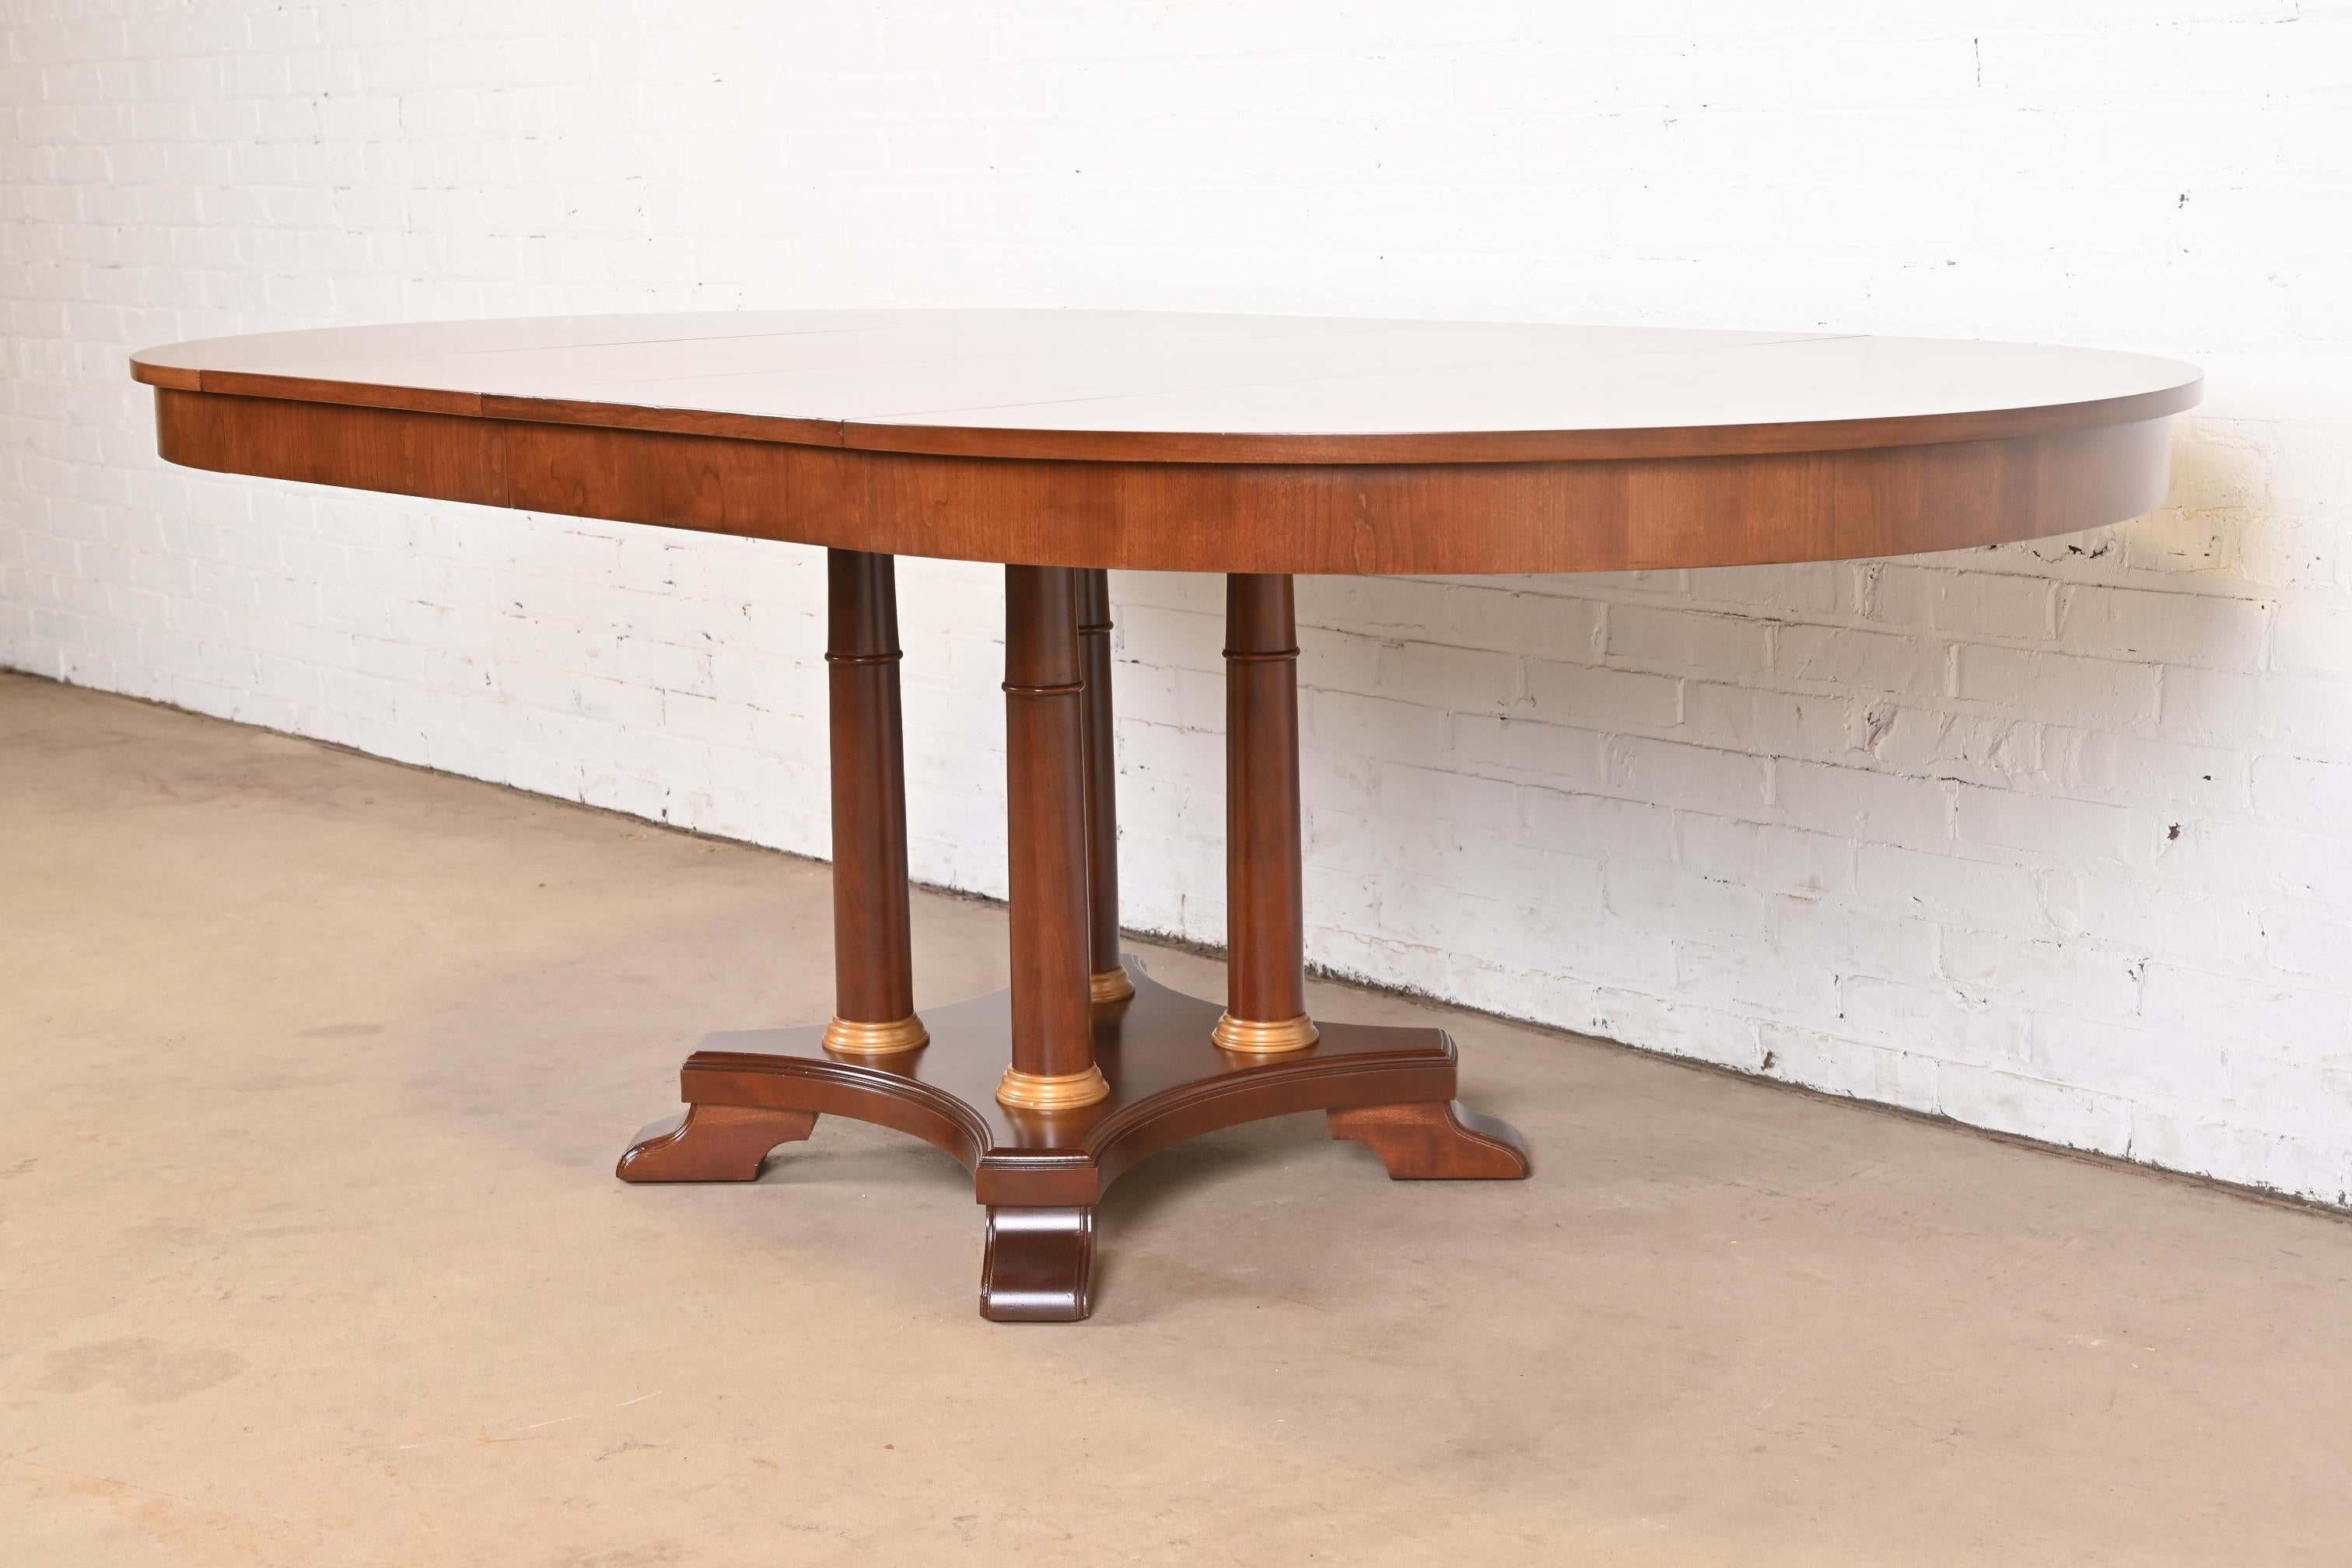 20th Century Neoclassical or Empire Cherry Wood Pedestal Dining Table, Newly Refinished For Sale